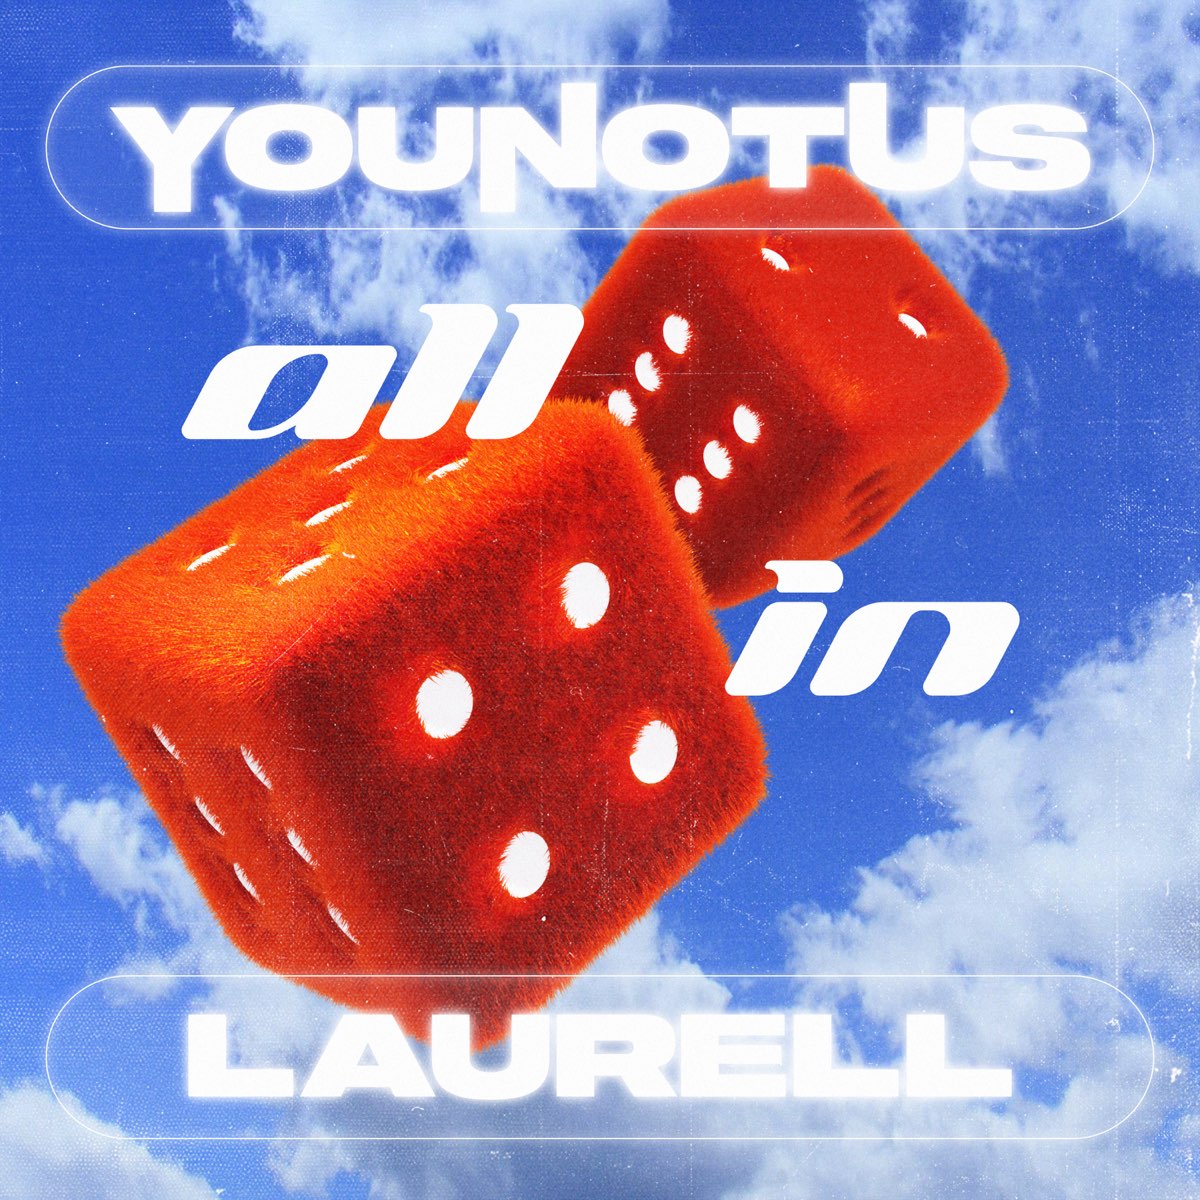 YouNotUs & Laurell — All In cover artwork